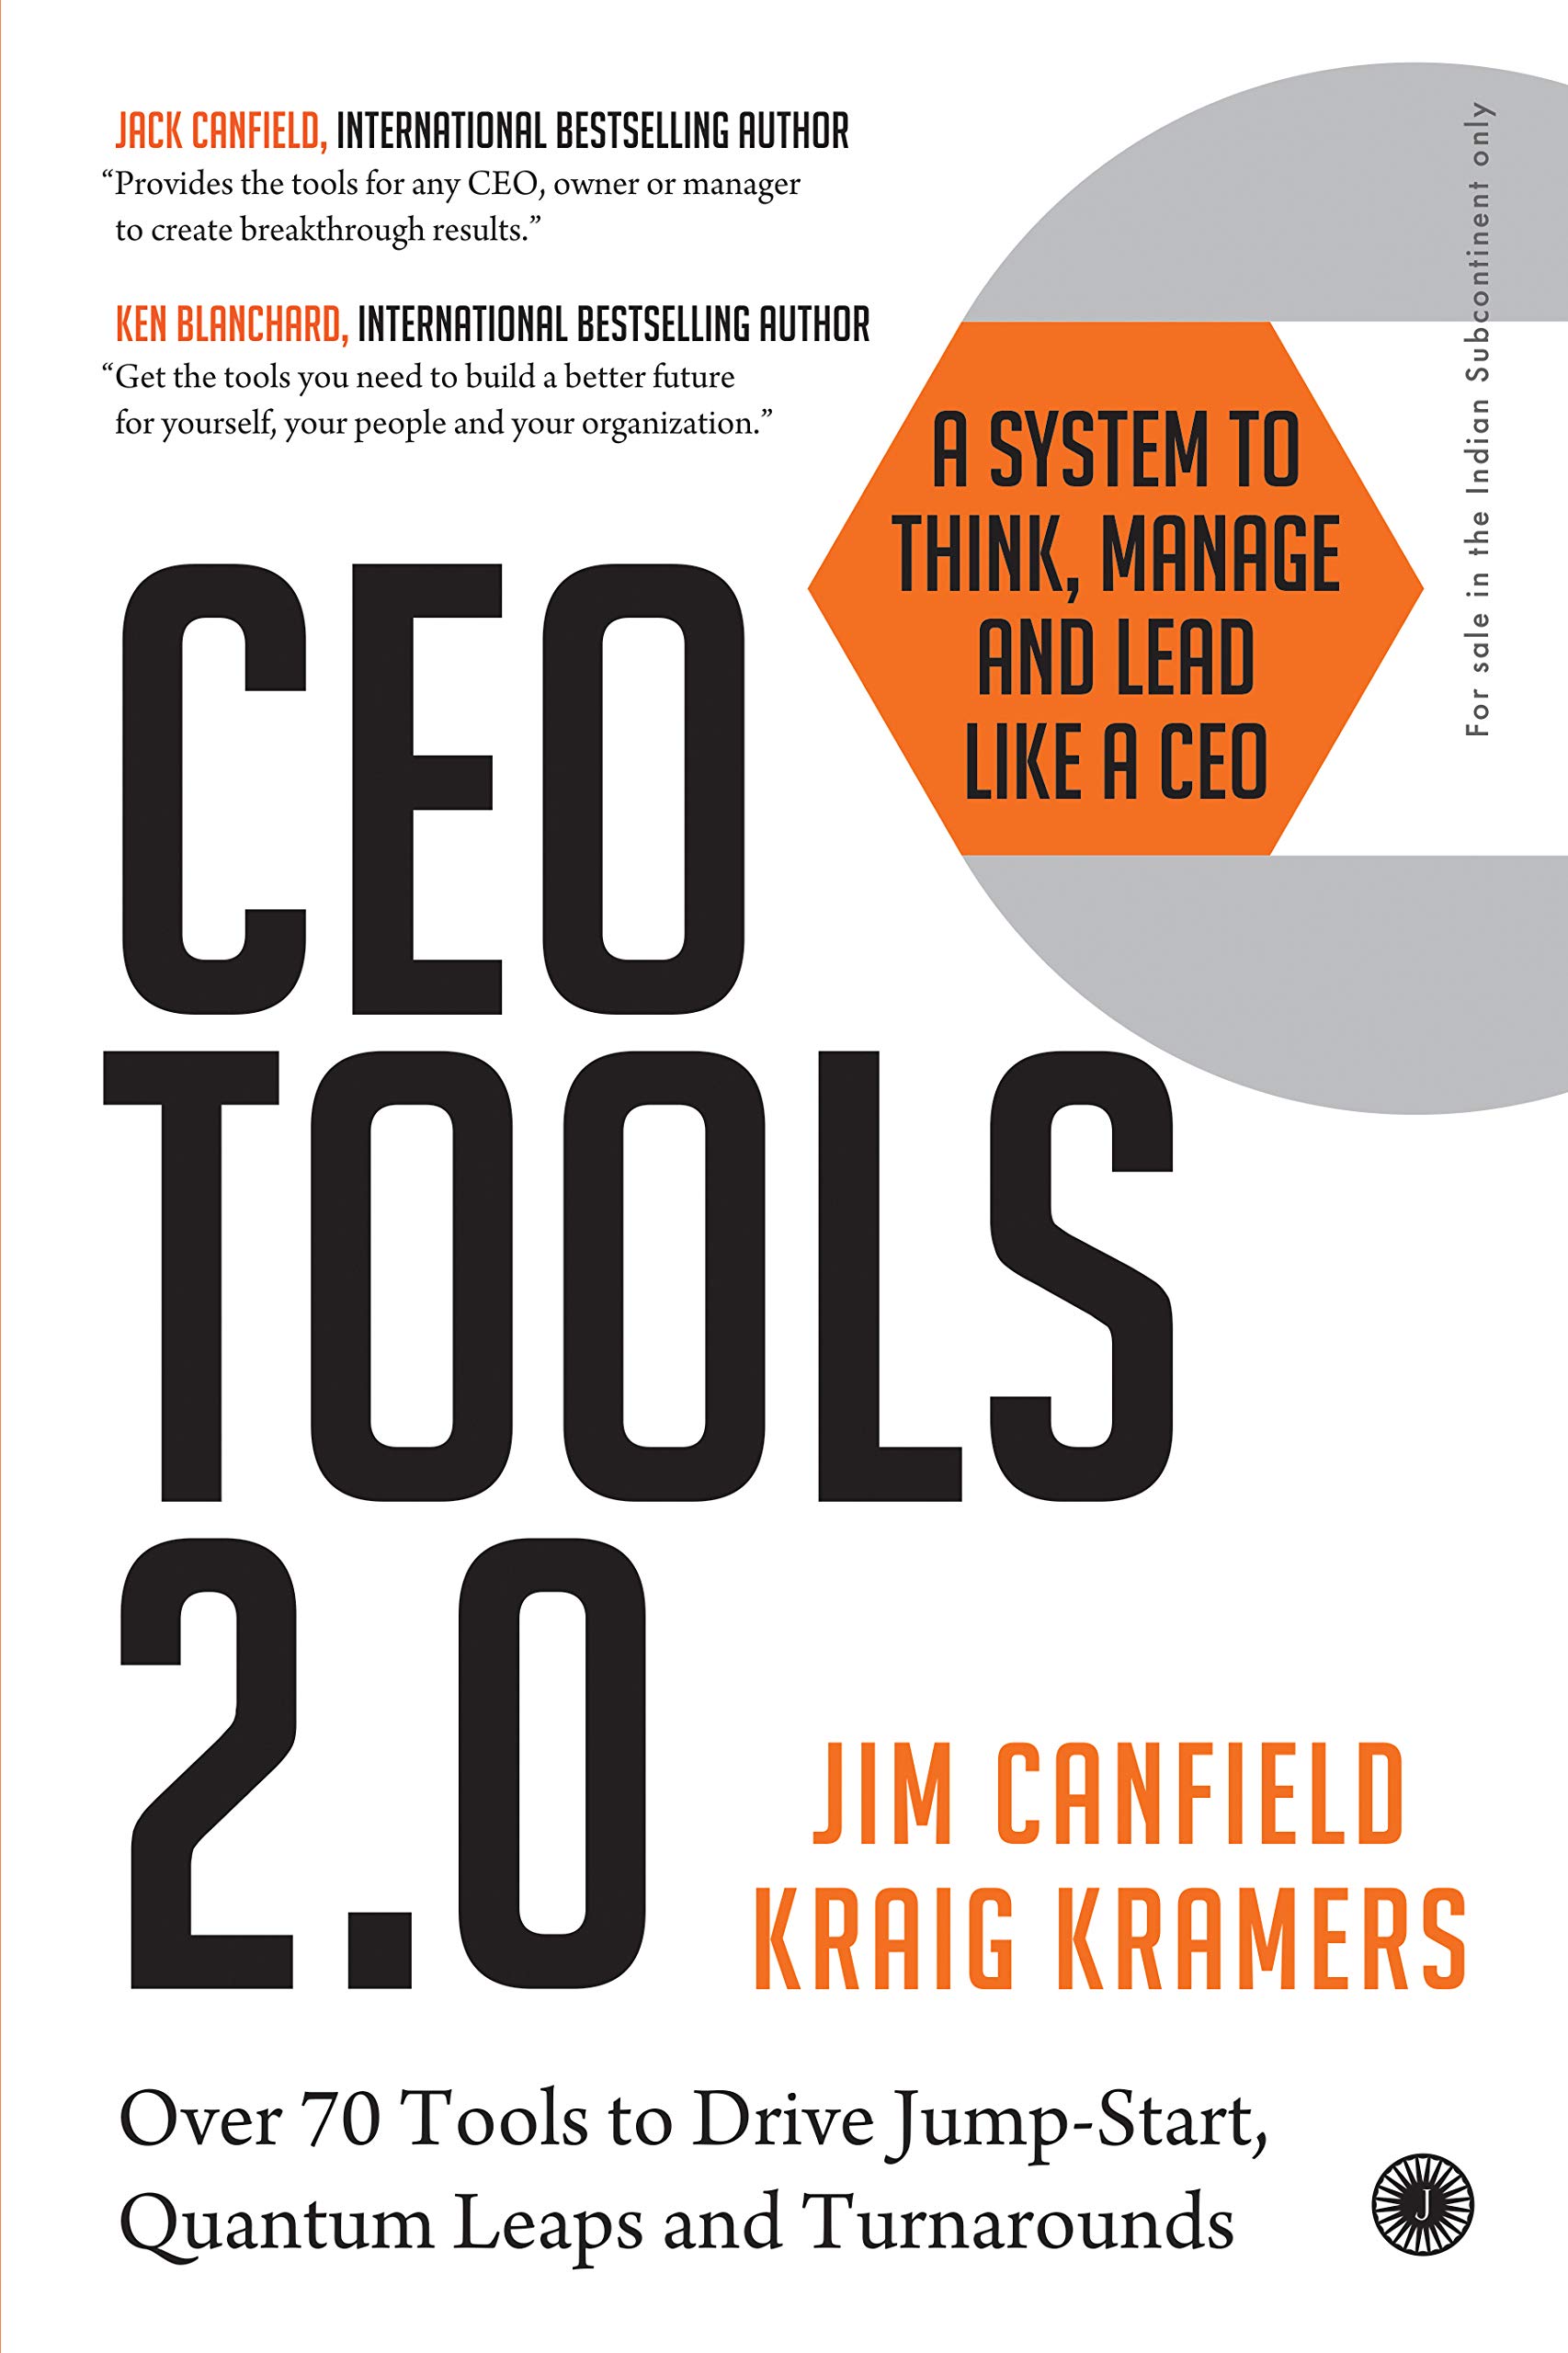 Ceo Tools 2.0 : A System To Think, Manage, And Lead Like A Ceo